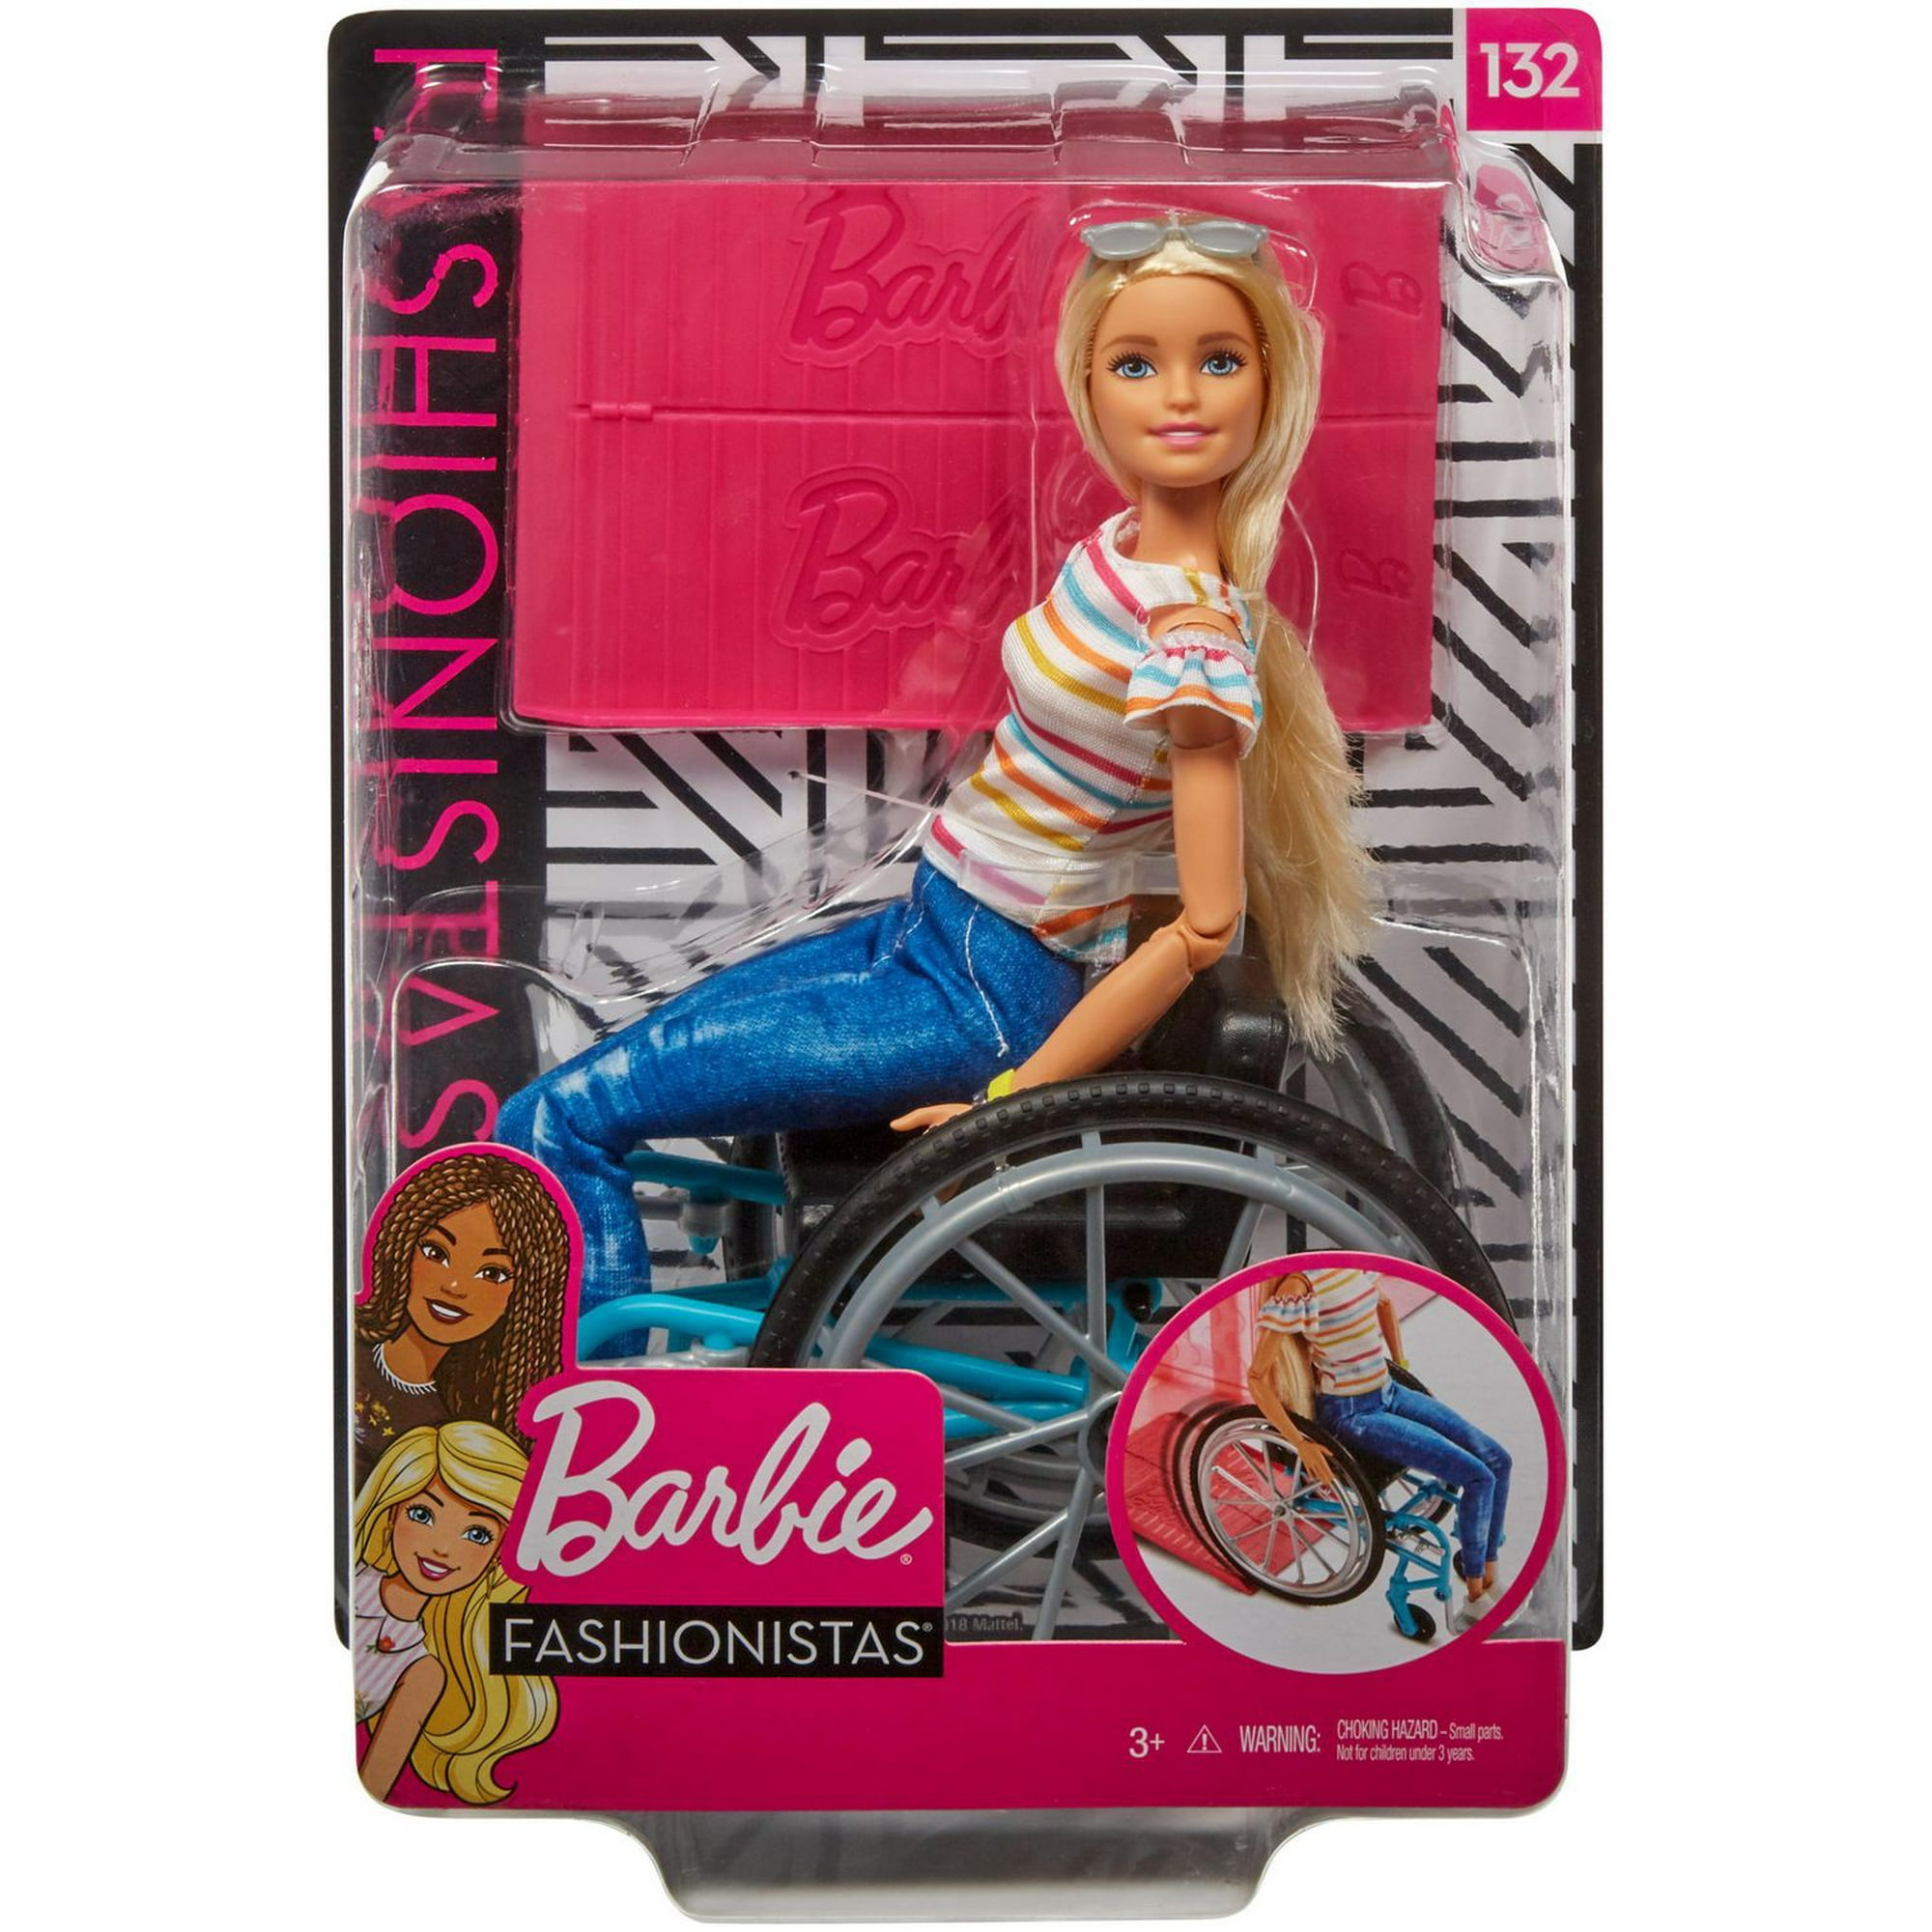 NEW! 2020 Mattel Barbie Made To Move Fashionista Doll in Wheelchair ~ NEW  IN BOX